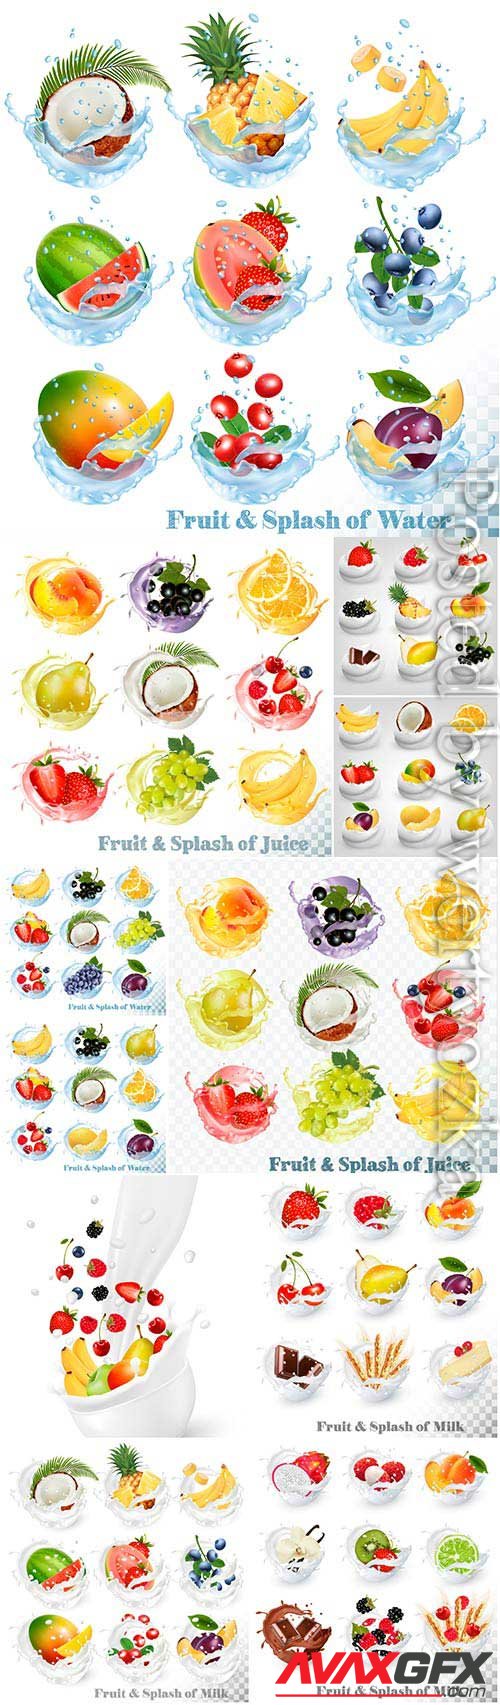 Fruits and berries in water and milk in vector